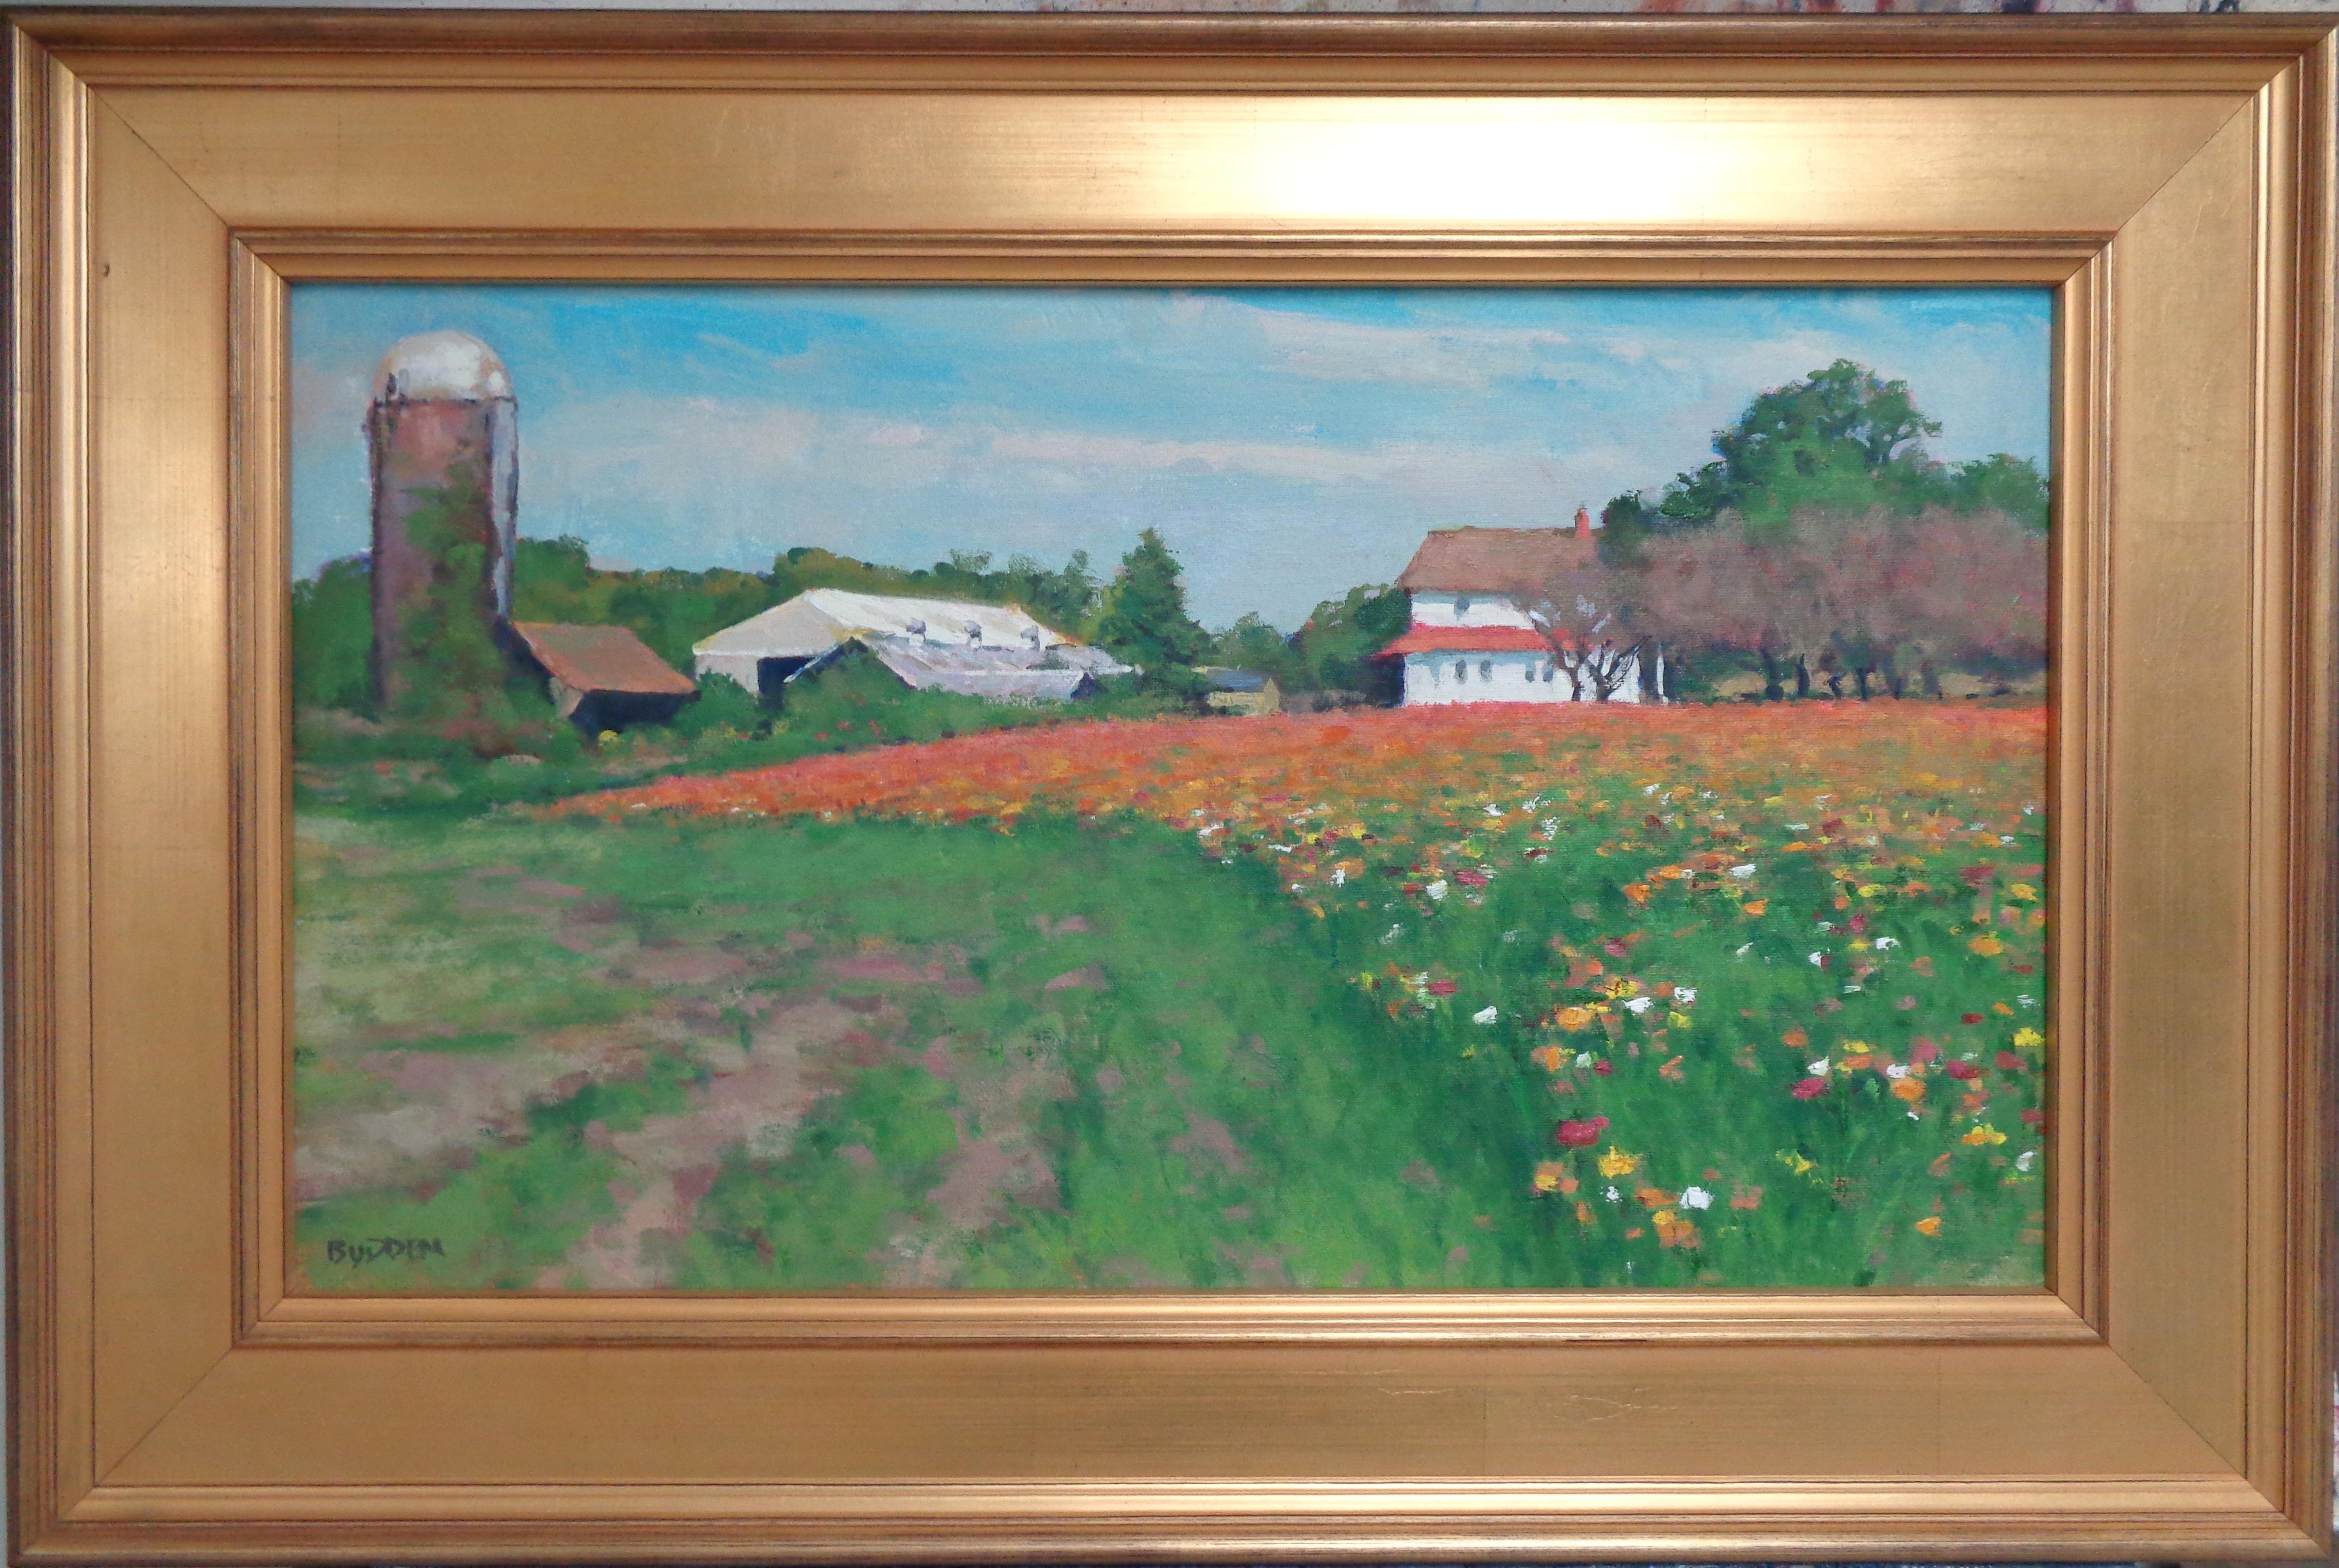 Black Farm Flowers
14 x 24 oil/canvas
20 x 30 framed
An oil painting on canvas that showcases the beautiful light of a summer day shinning on a field of flowers. This is one of my favorite places to set up my easel and paint near my home in